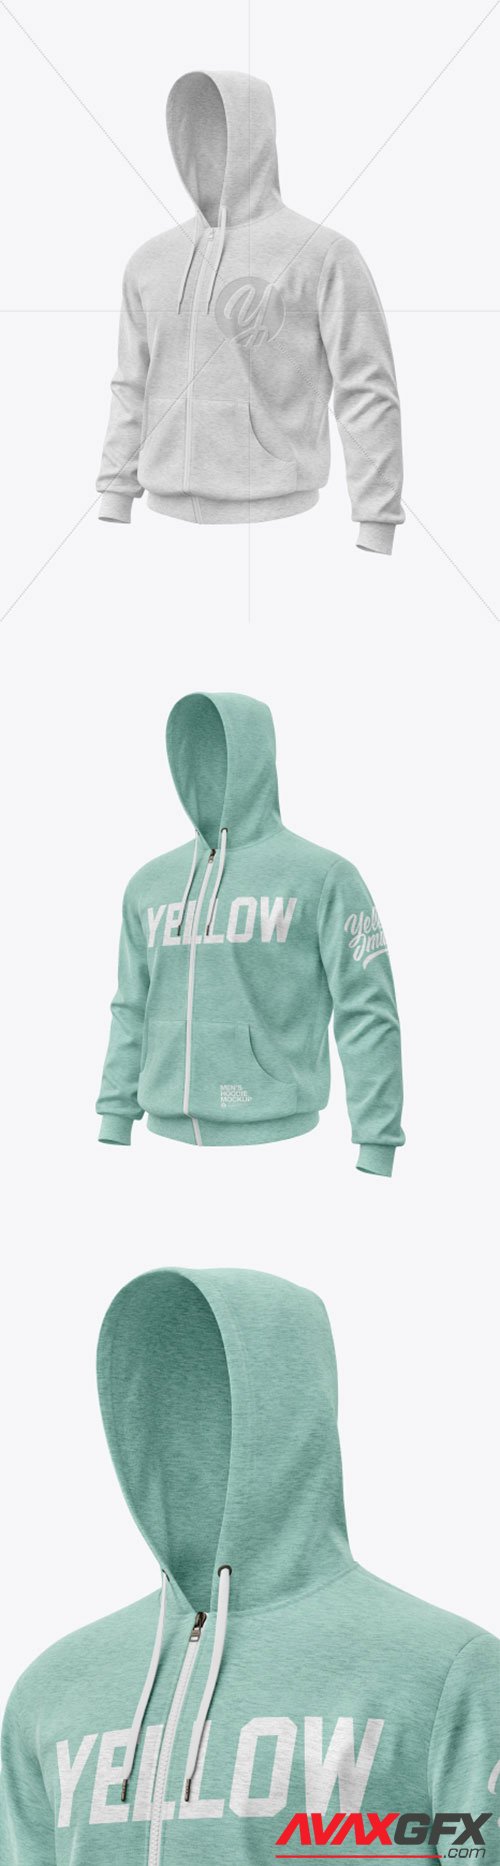 Download Melange Hoodie Mockup - Front View 47881 » AVAXGFX - All ...